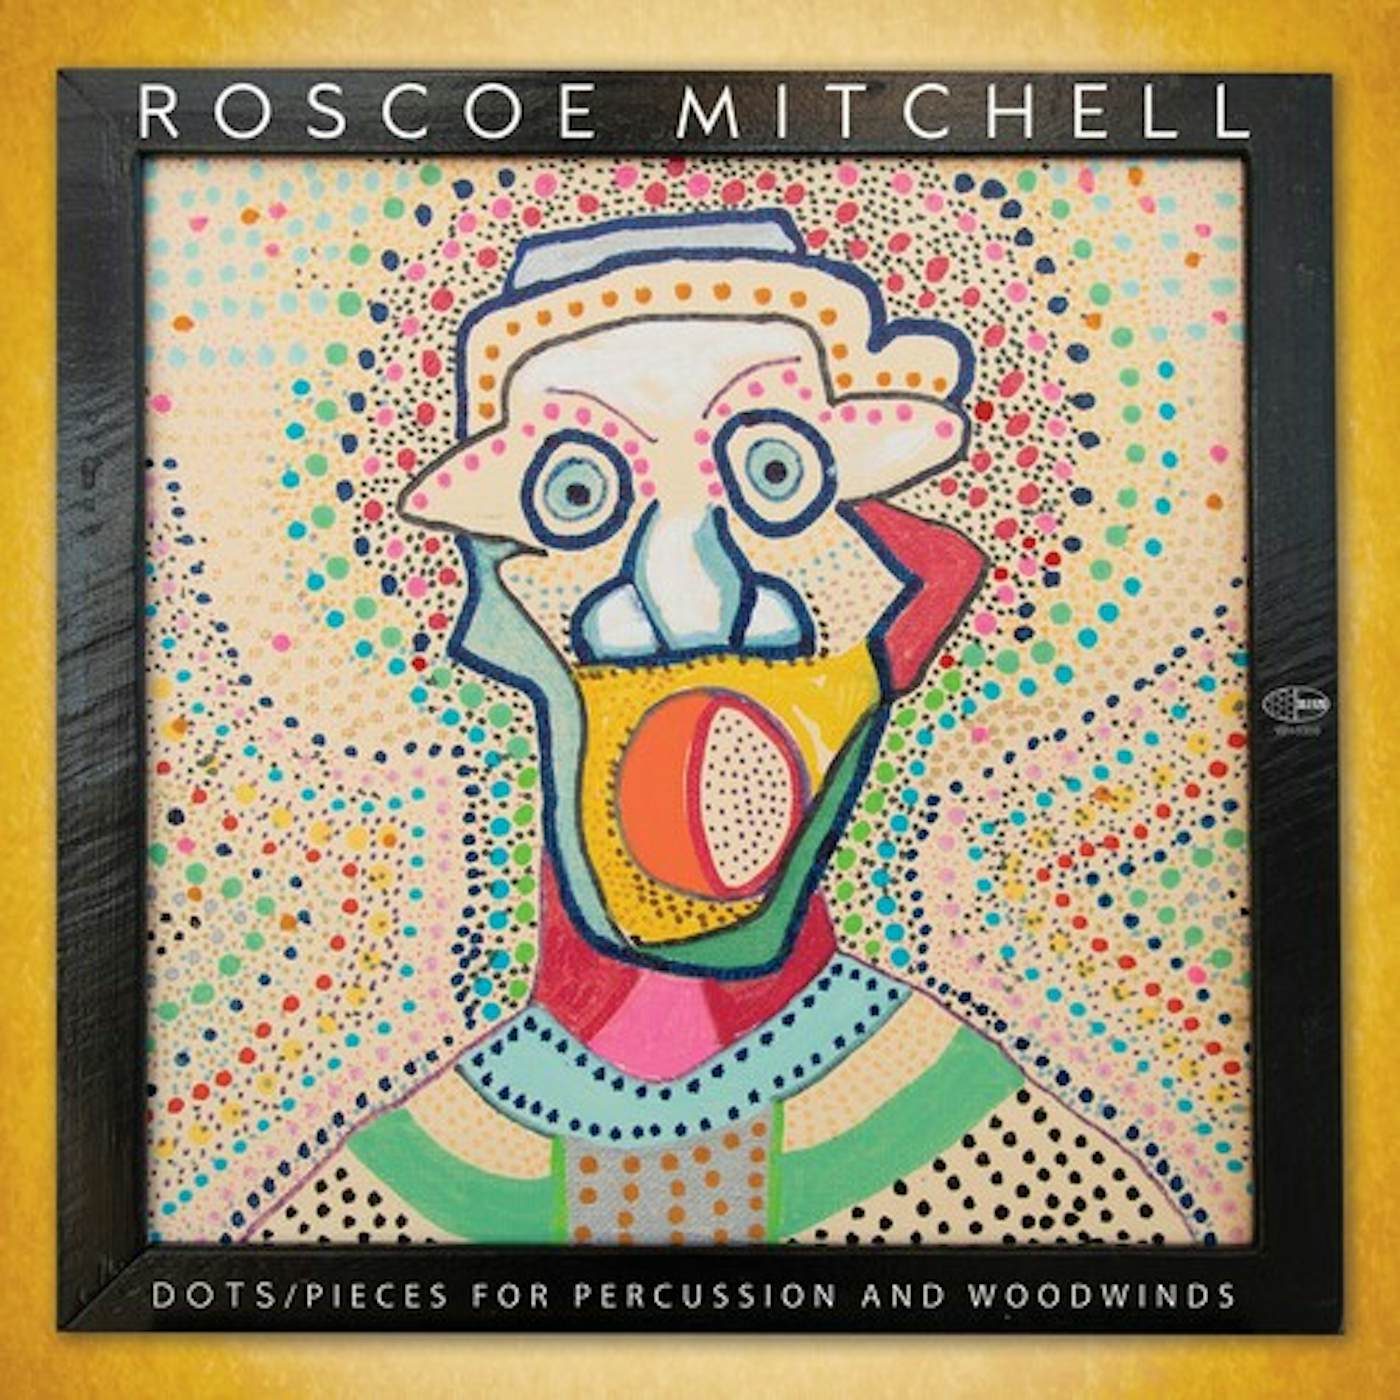 Roscoe Mitchell DOTS / PIECES FOR PERCUSSION AND WOODWINDS CD